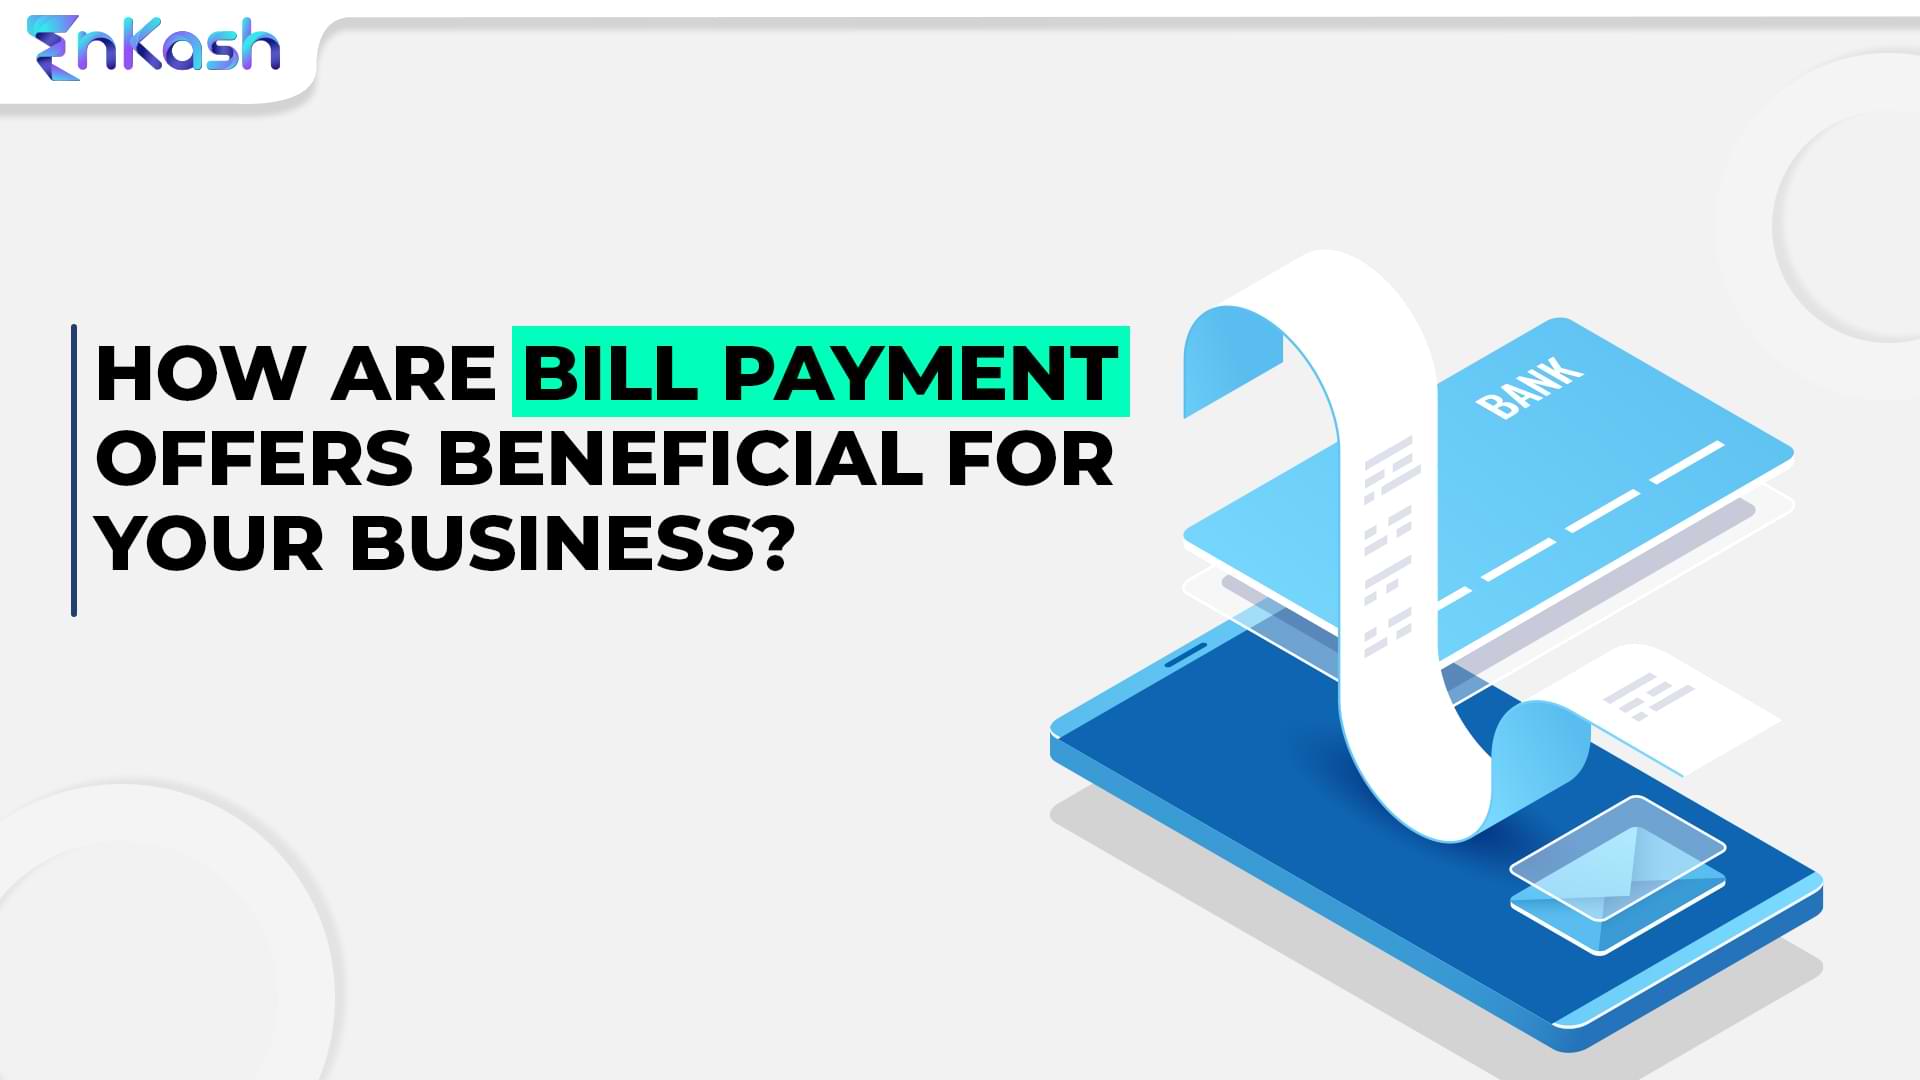 How are bill payment offers